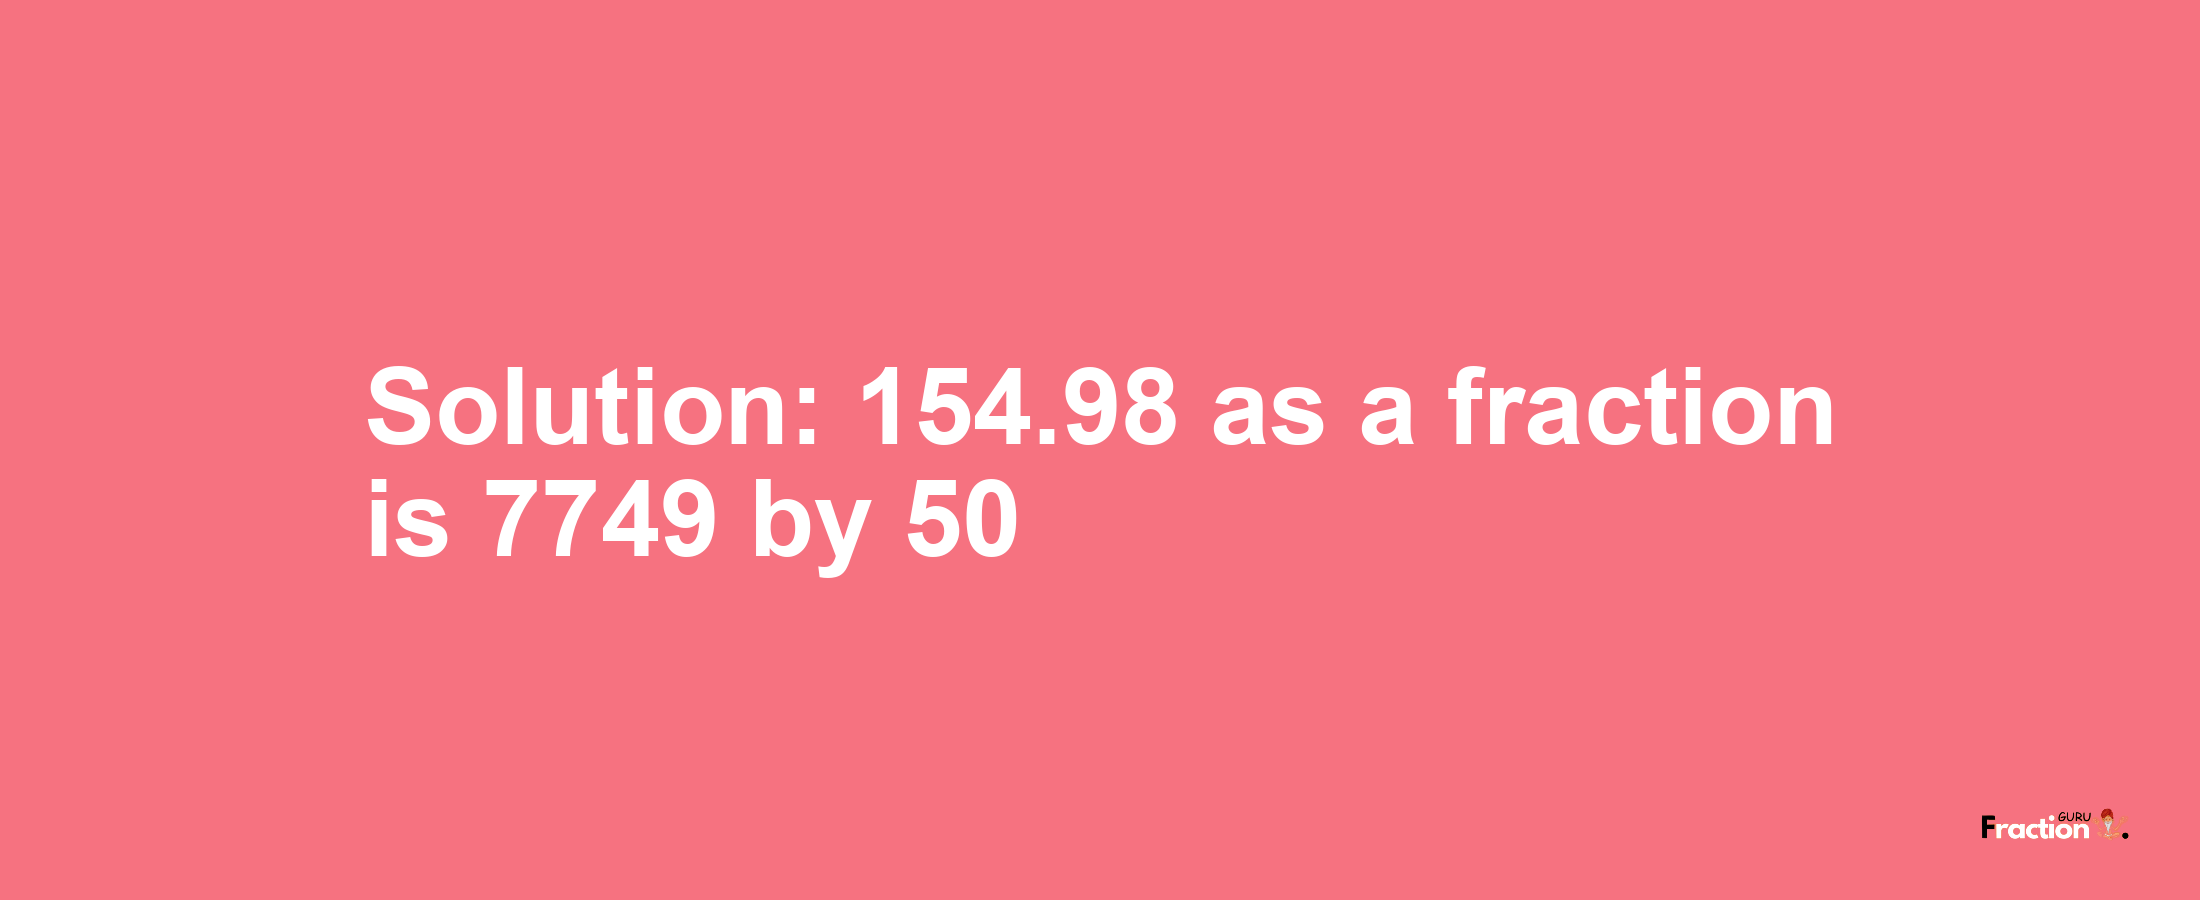 Solution:154.98 as a fraction is 7749/50